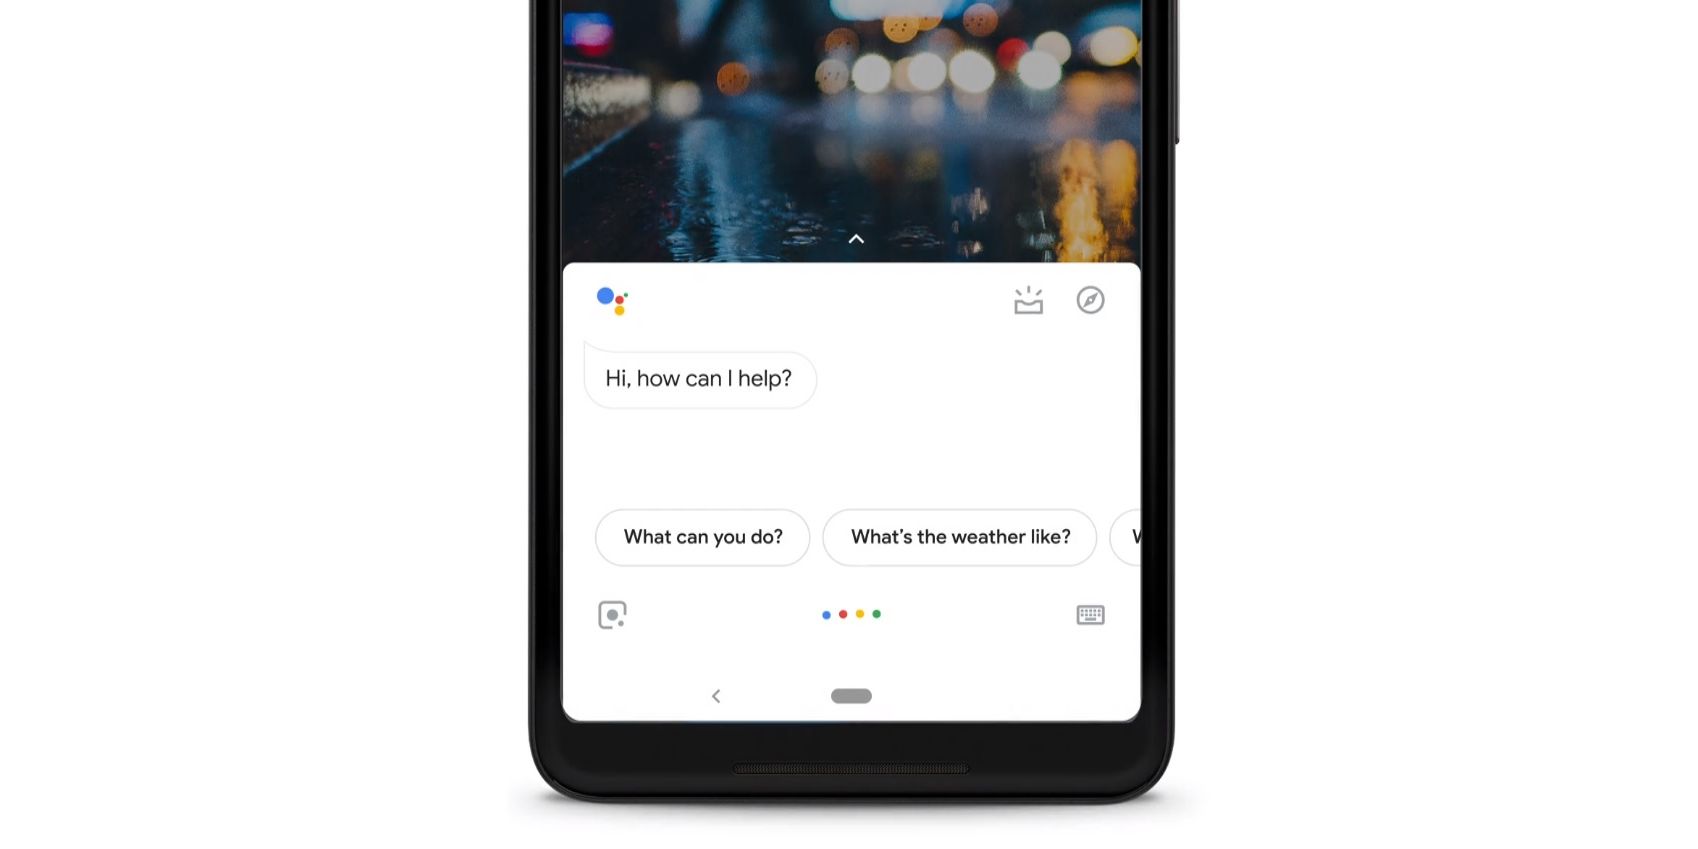 Google Assistant on an Android smartphone